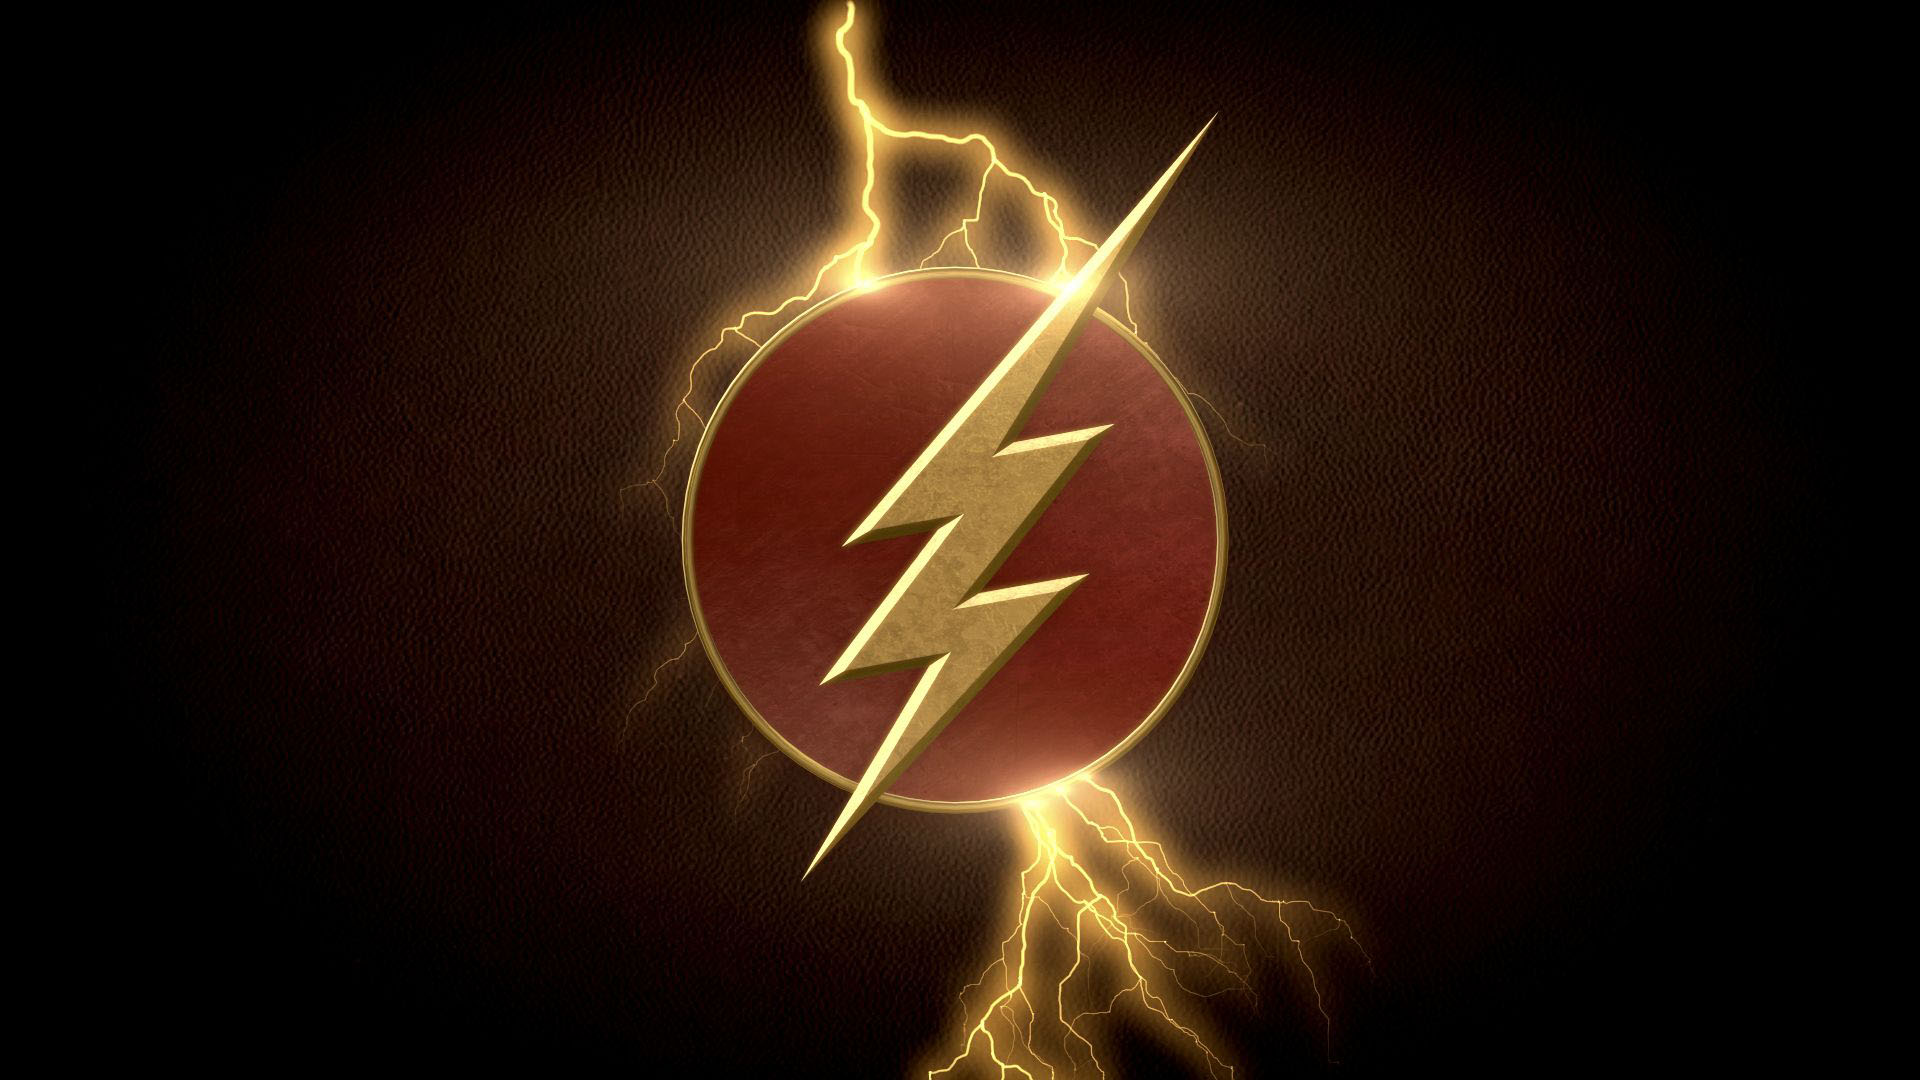 9 The Flash logo HD wallpapers free download